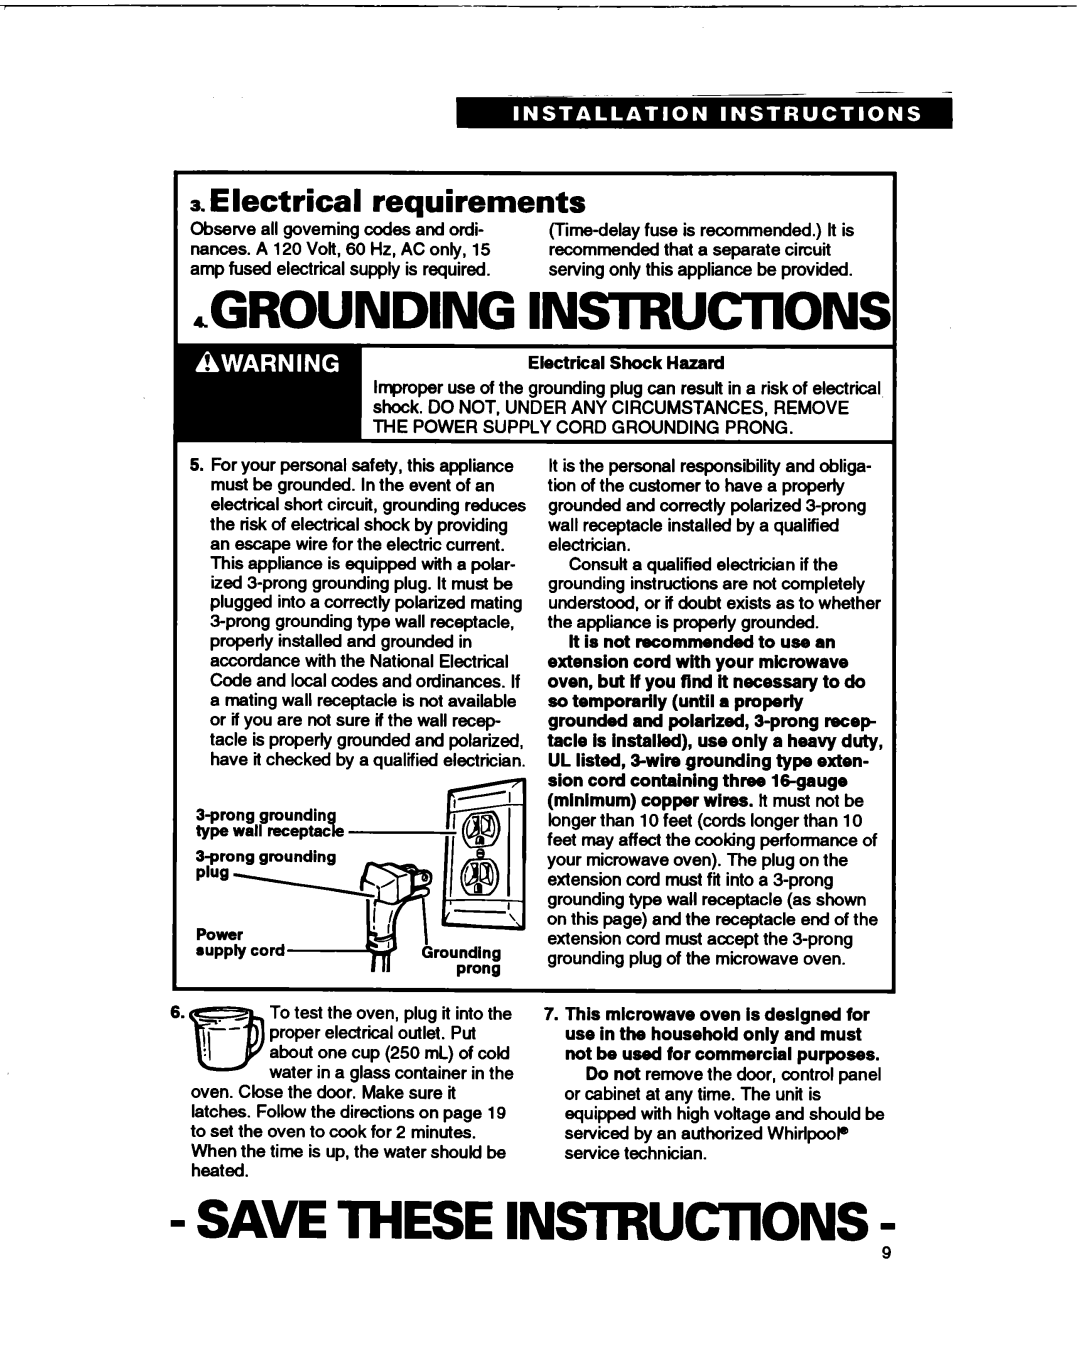 Whirlpool MT1061XB GROUNDING INSTRlJCTlONS, Save These Instructions, Electrical requirements, Electrical Shock Hazard 